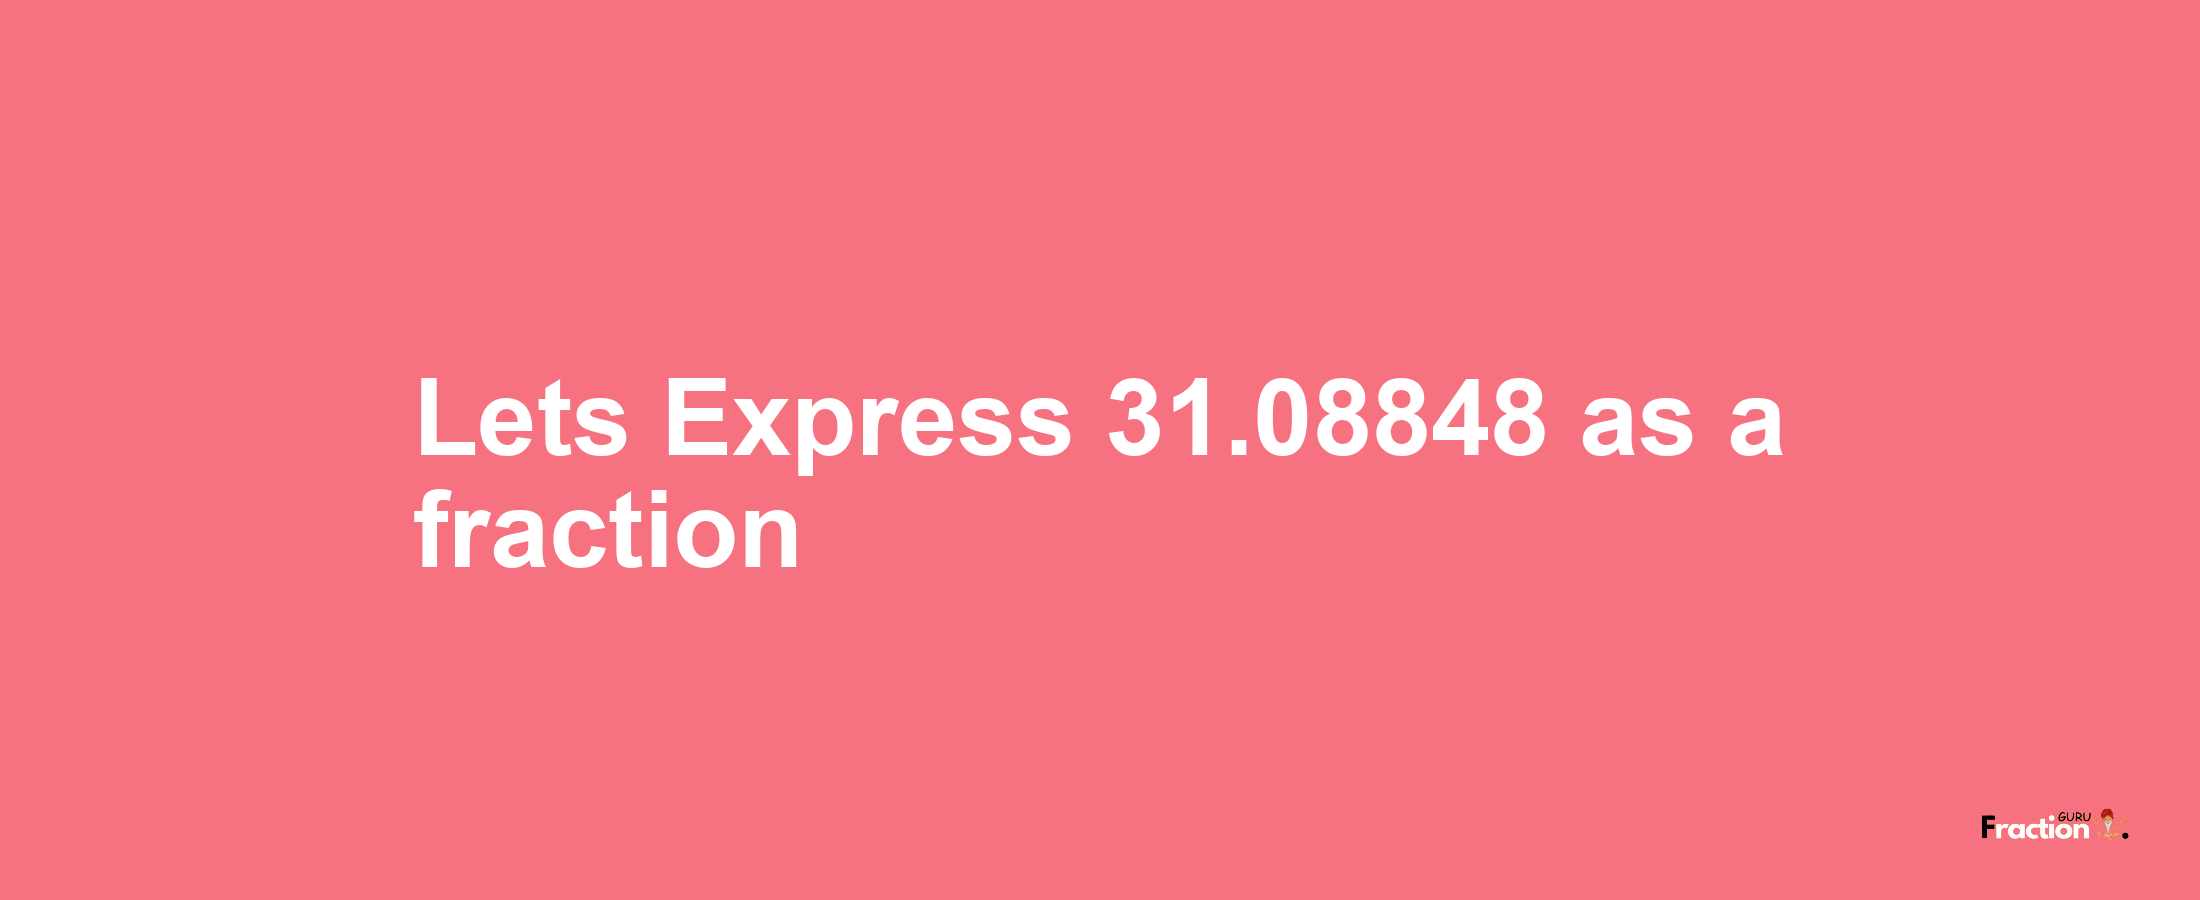 Lets Express 31.08848 as afraction